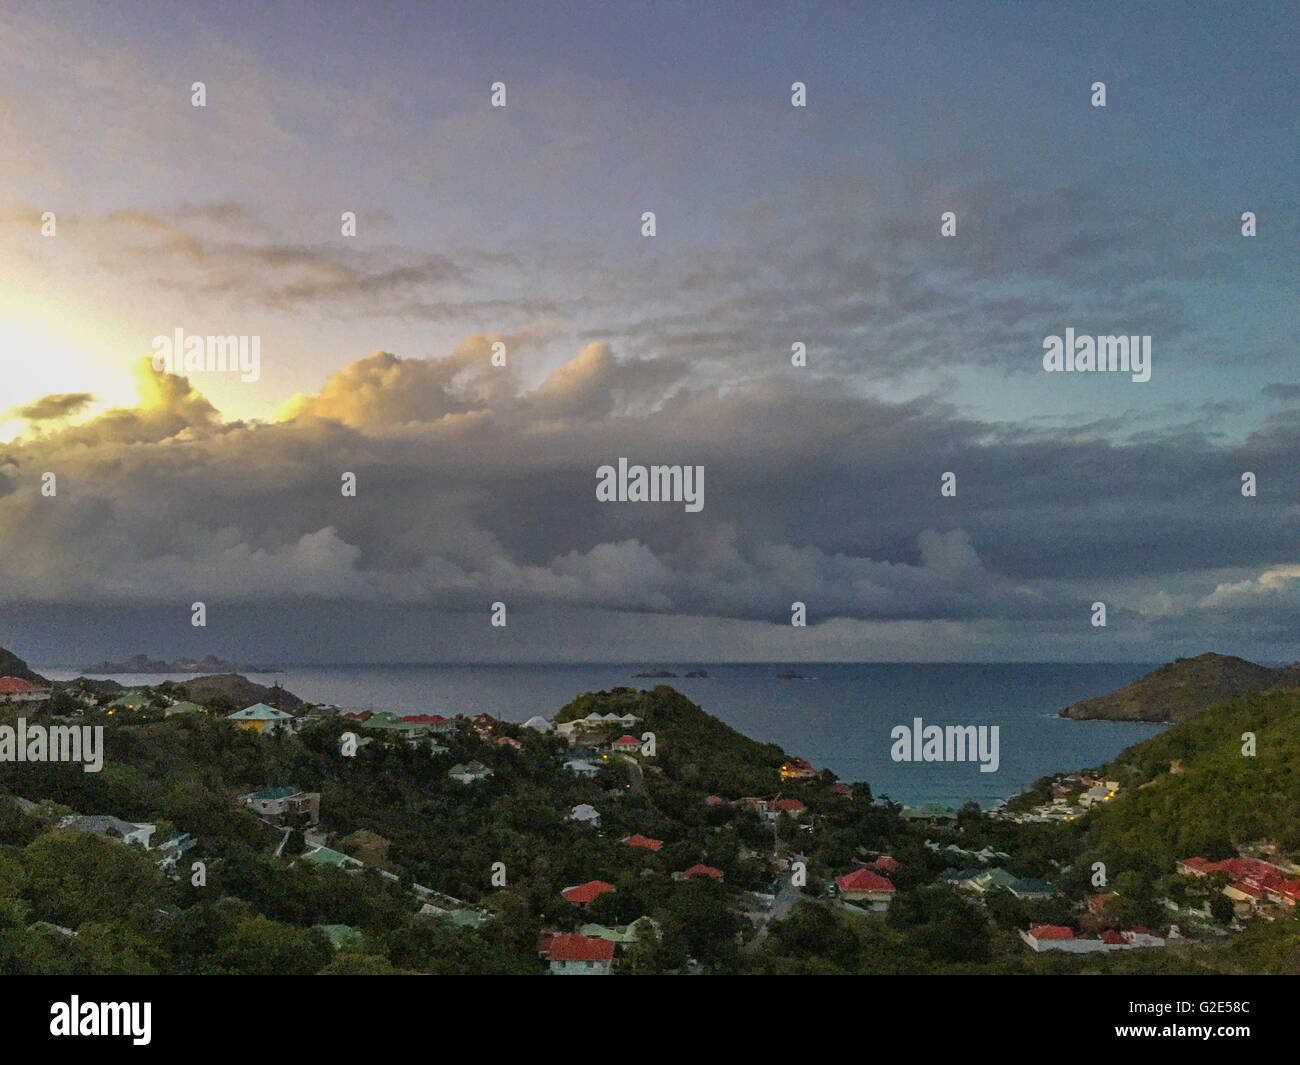 awesome sunset over the ocean and Flammands beach, St Bart's Stock Photo